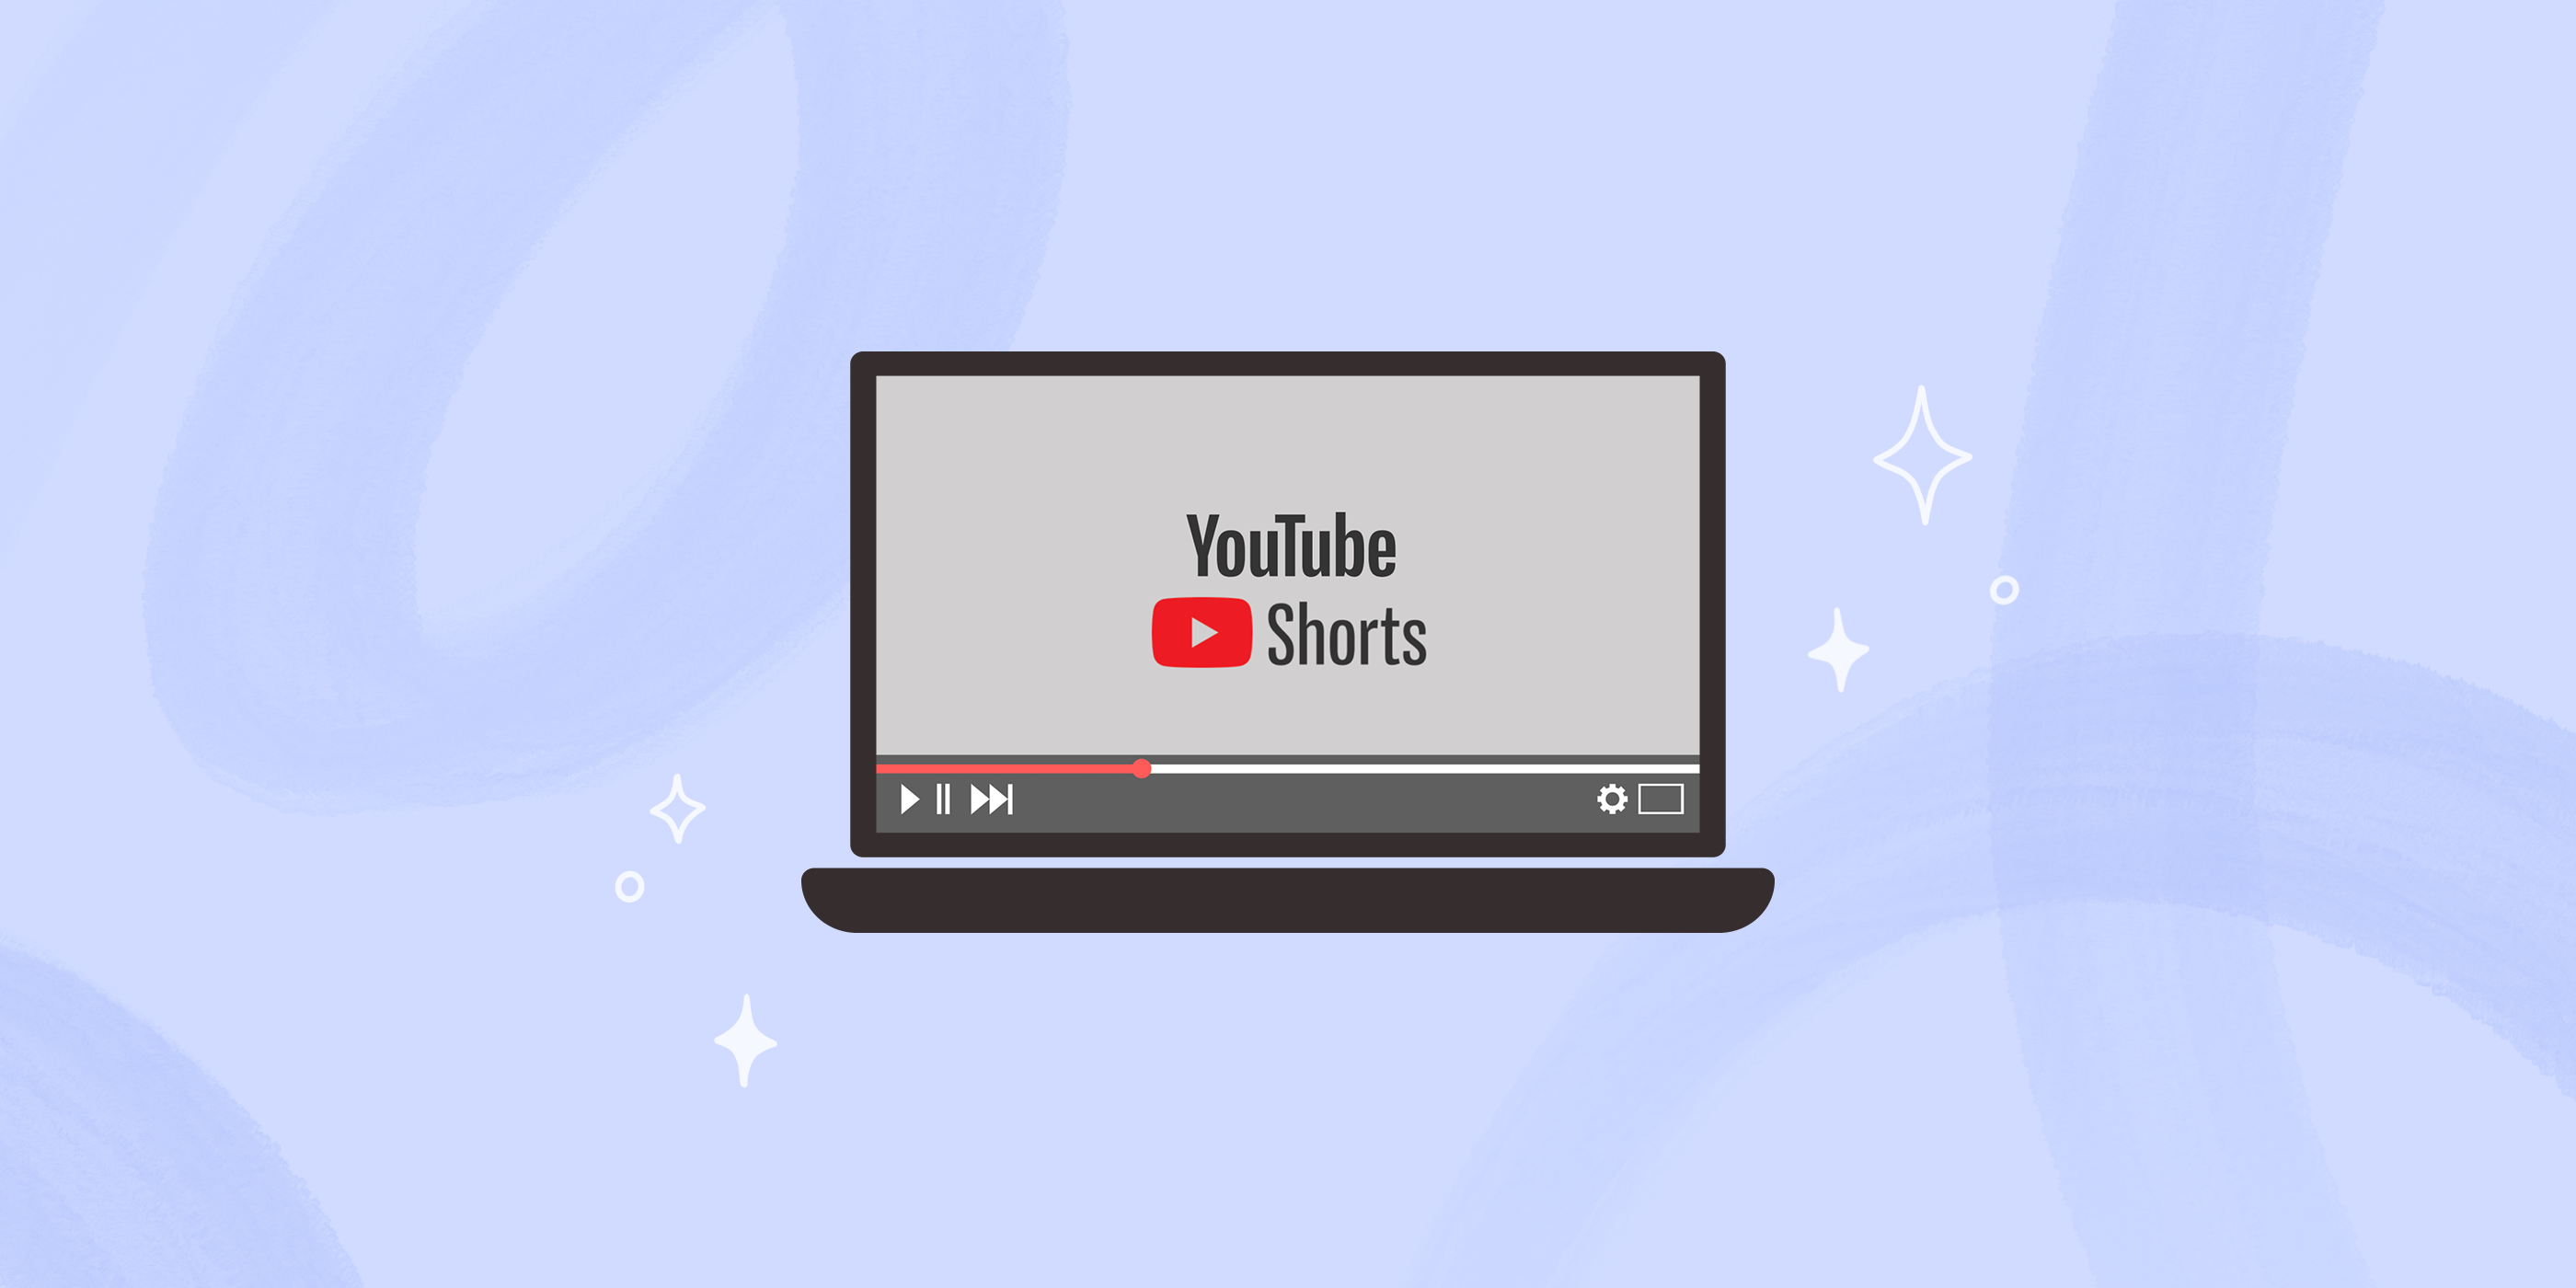 How to Make YouTube Shorts, by allie-teegardin